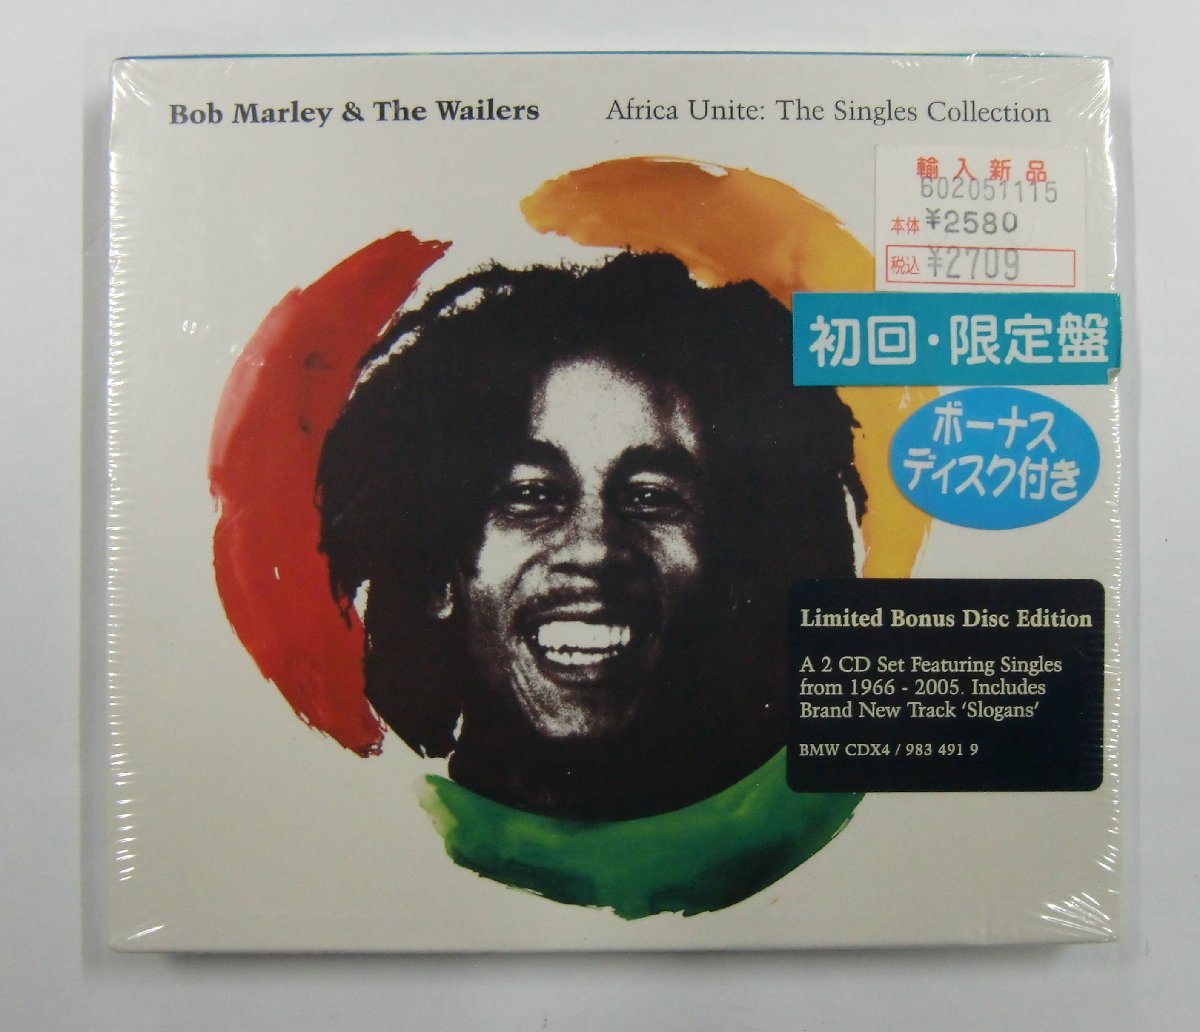 CD ボブ・マーリー Bob Marly＆The Wailers Africa Unite: The Singles Collection 初回限定盤 ボーナスディスク付き【サ901】_画像1